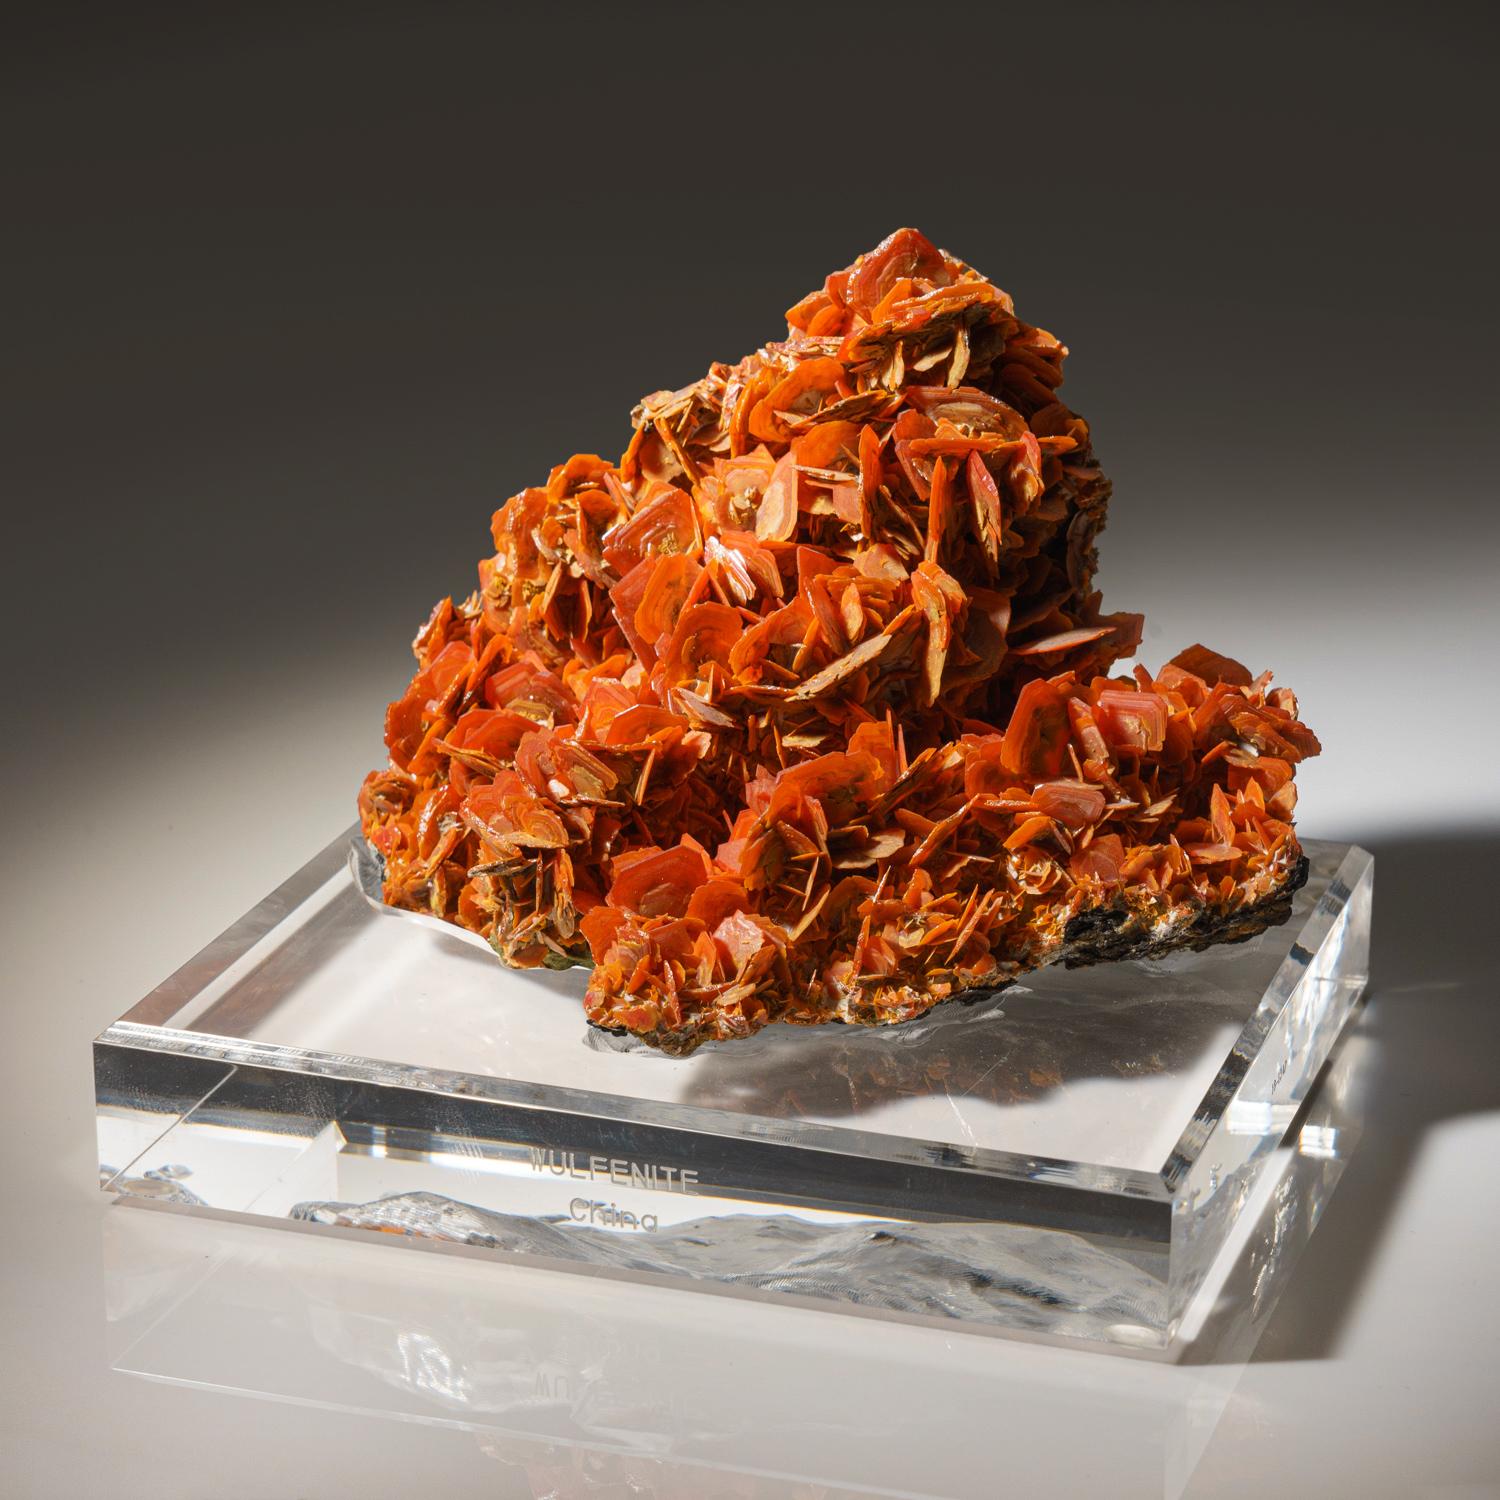 Chinese Wulfenite Mineral Crystal from China (1.33 lbs) For Sale